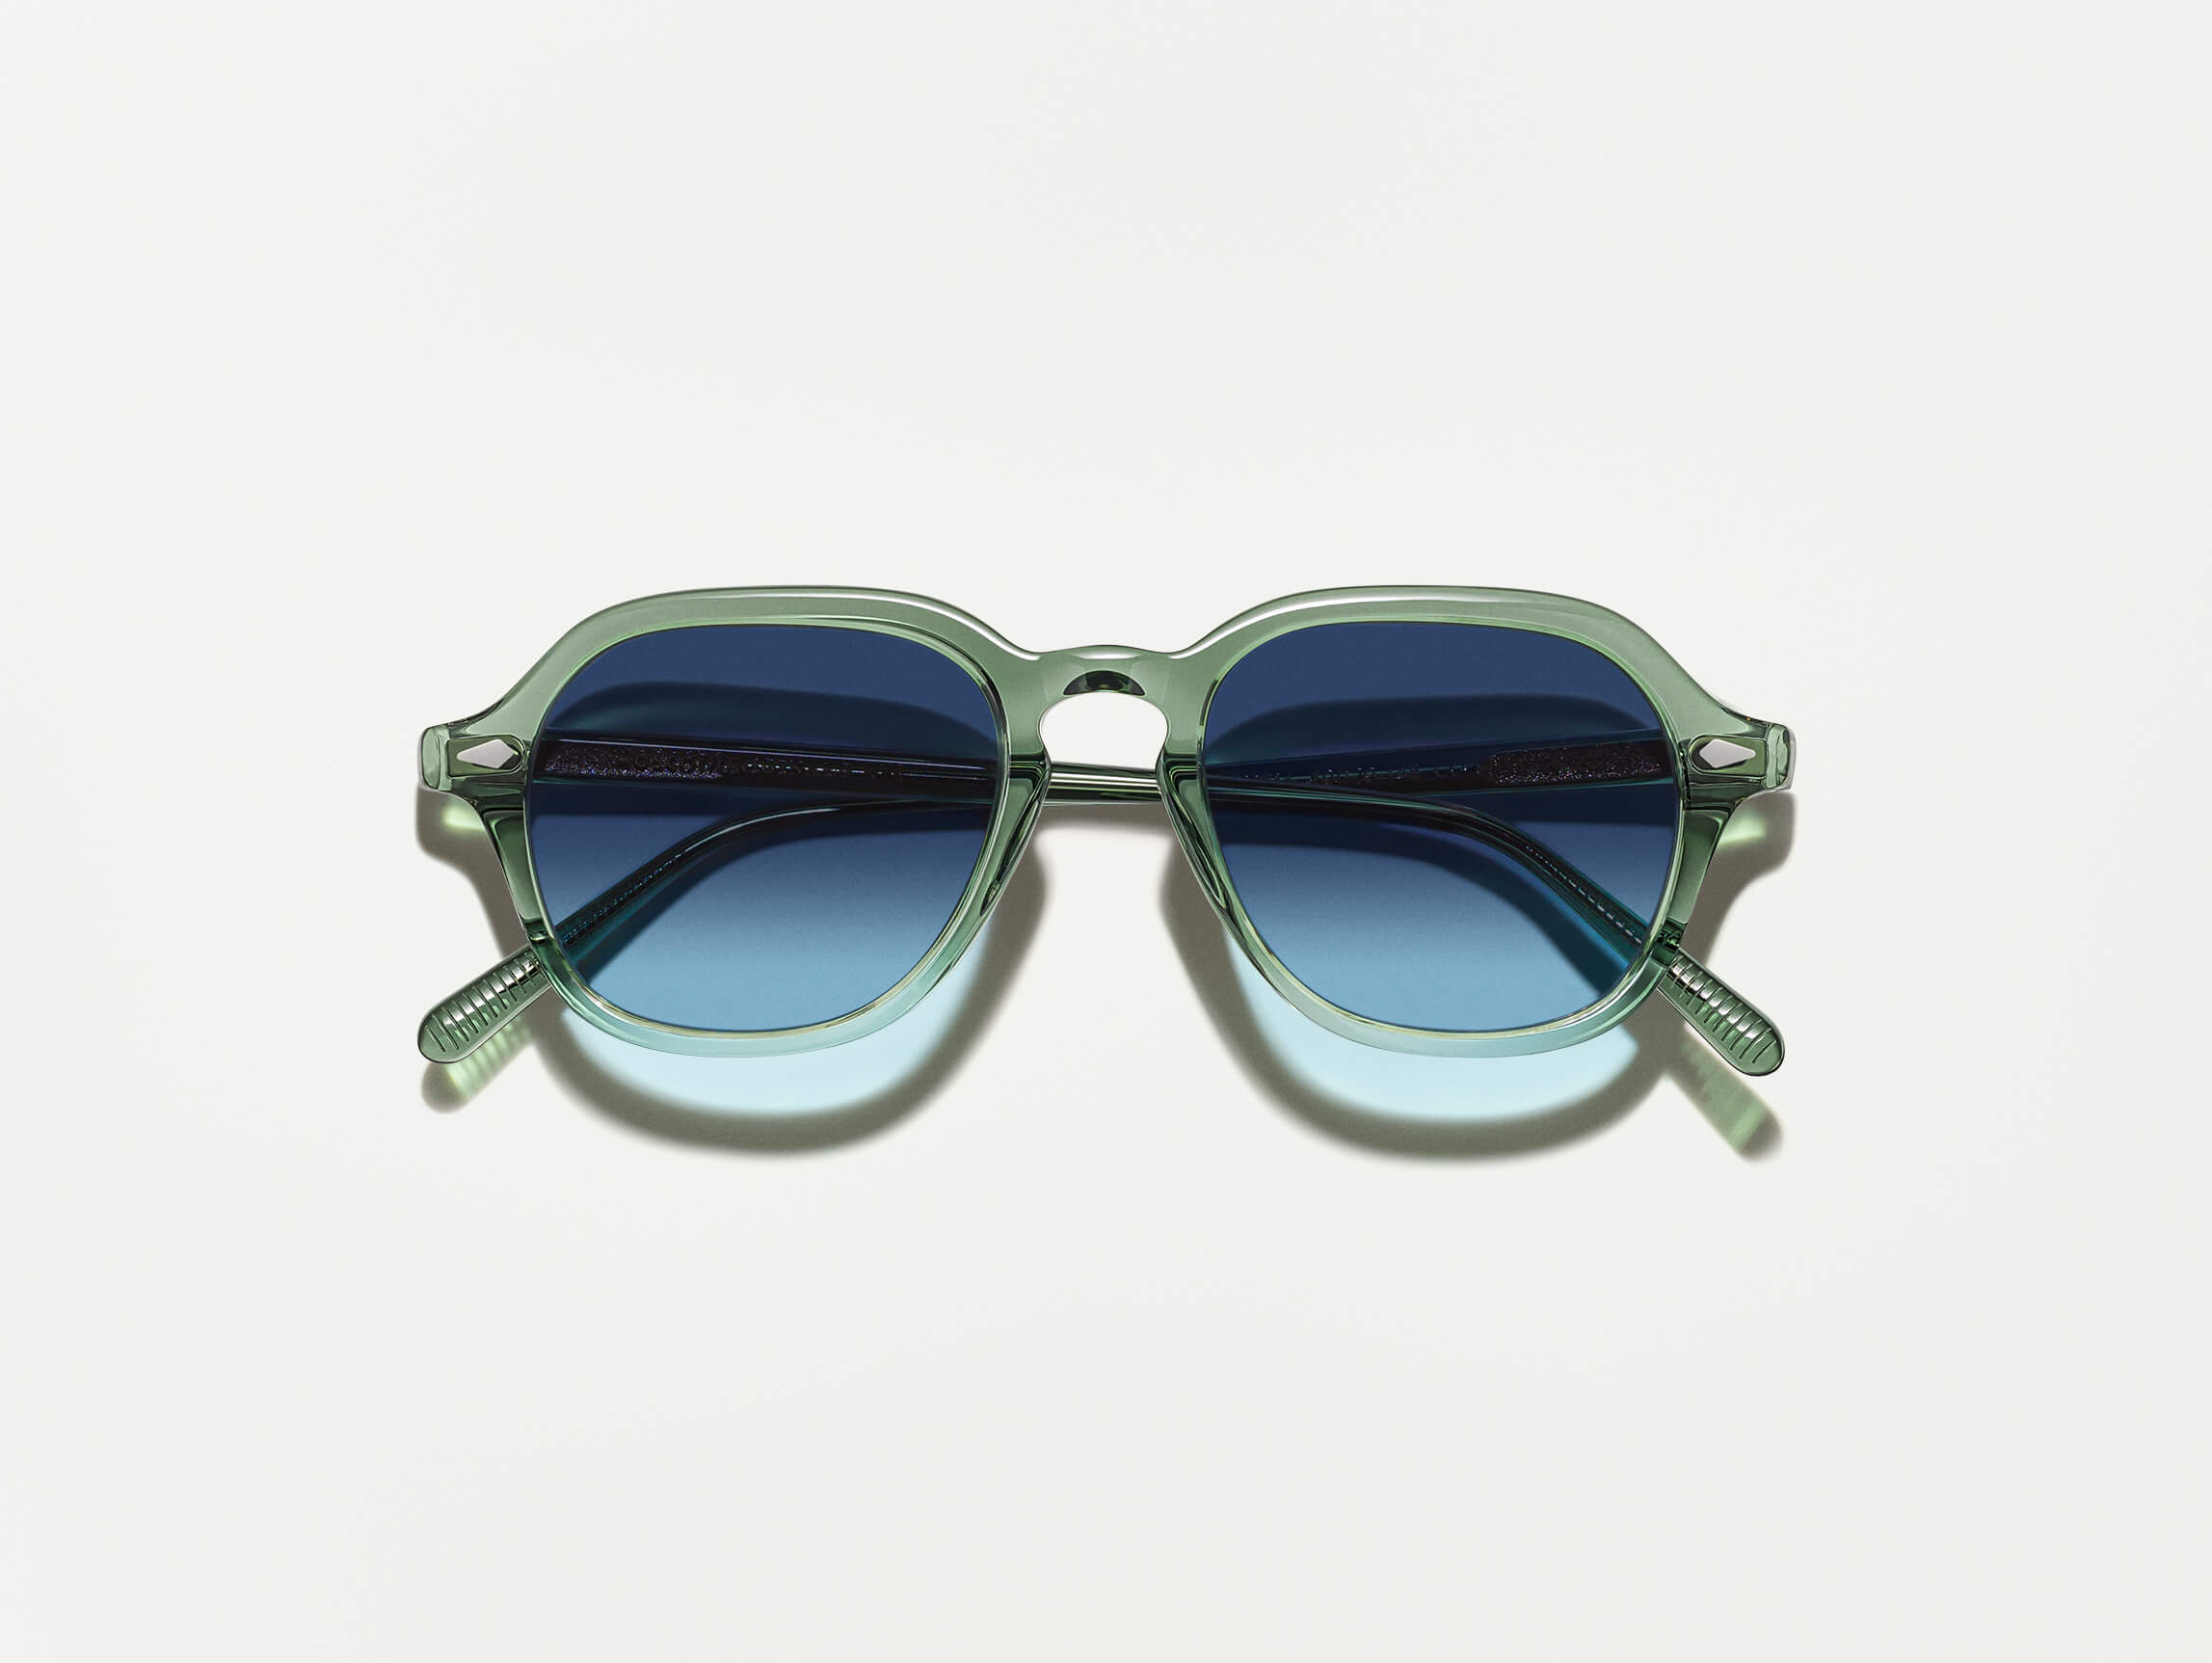 #color_pine | The YENEM SUN in Pine with Denim Blue Tinted Lenses